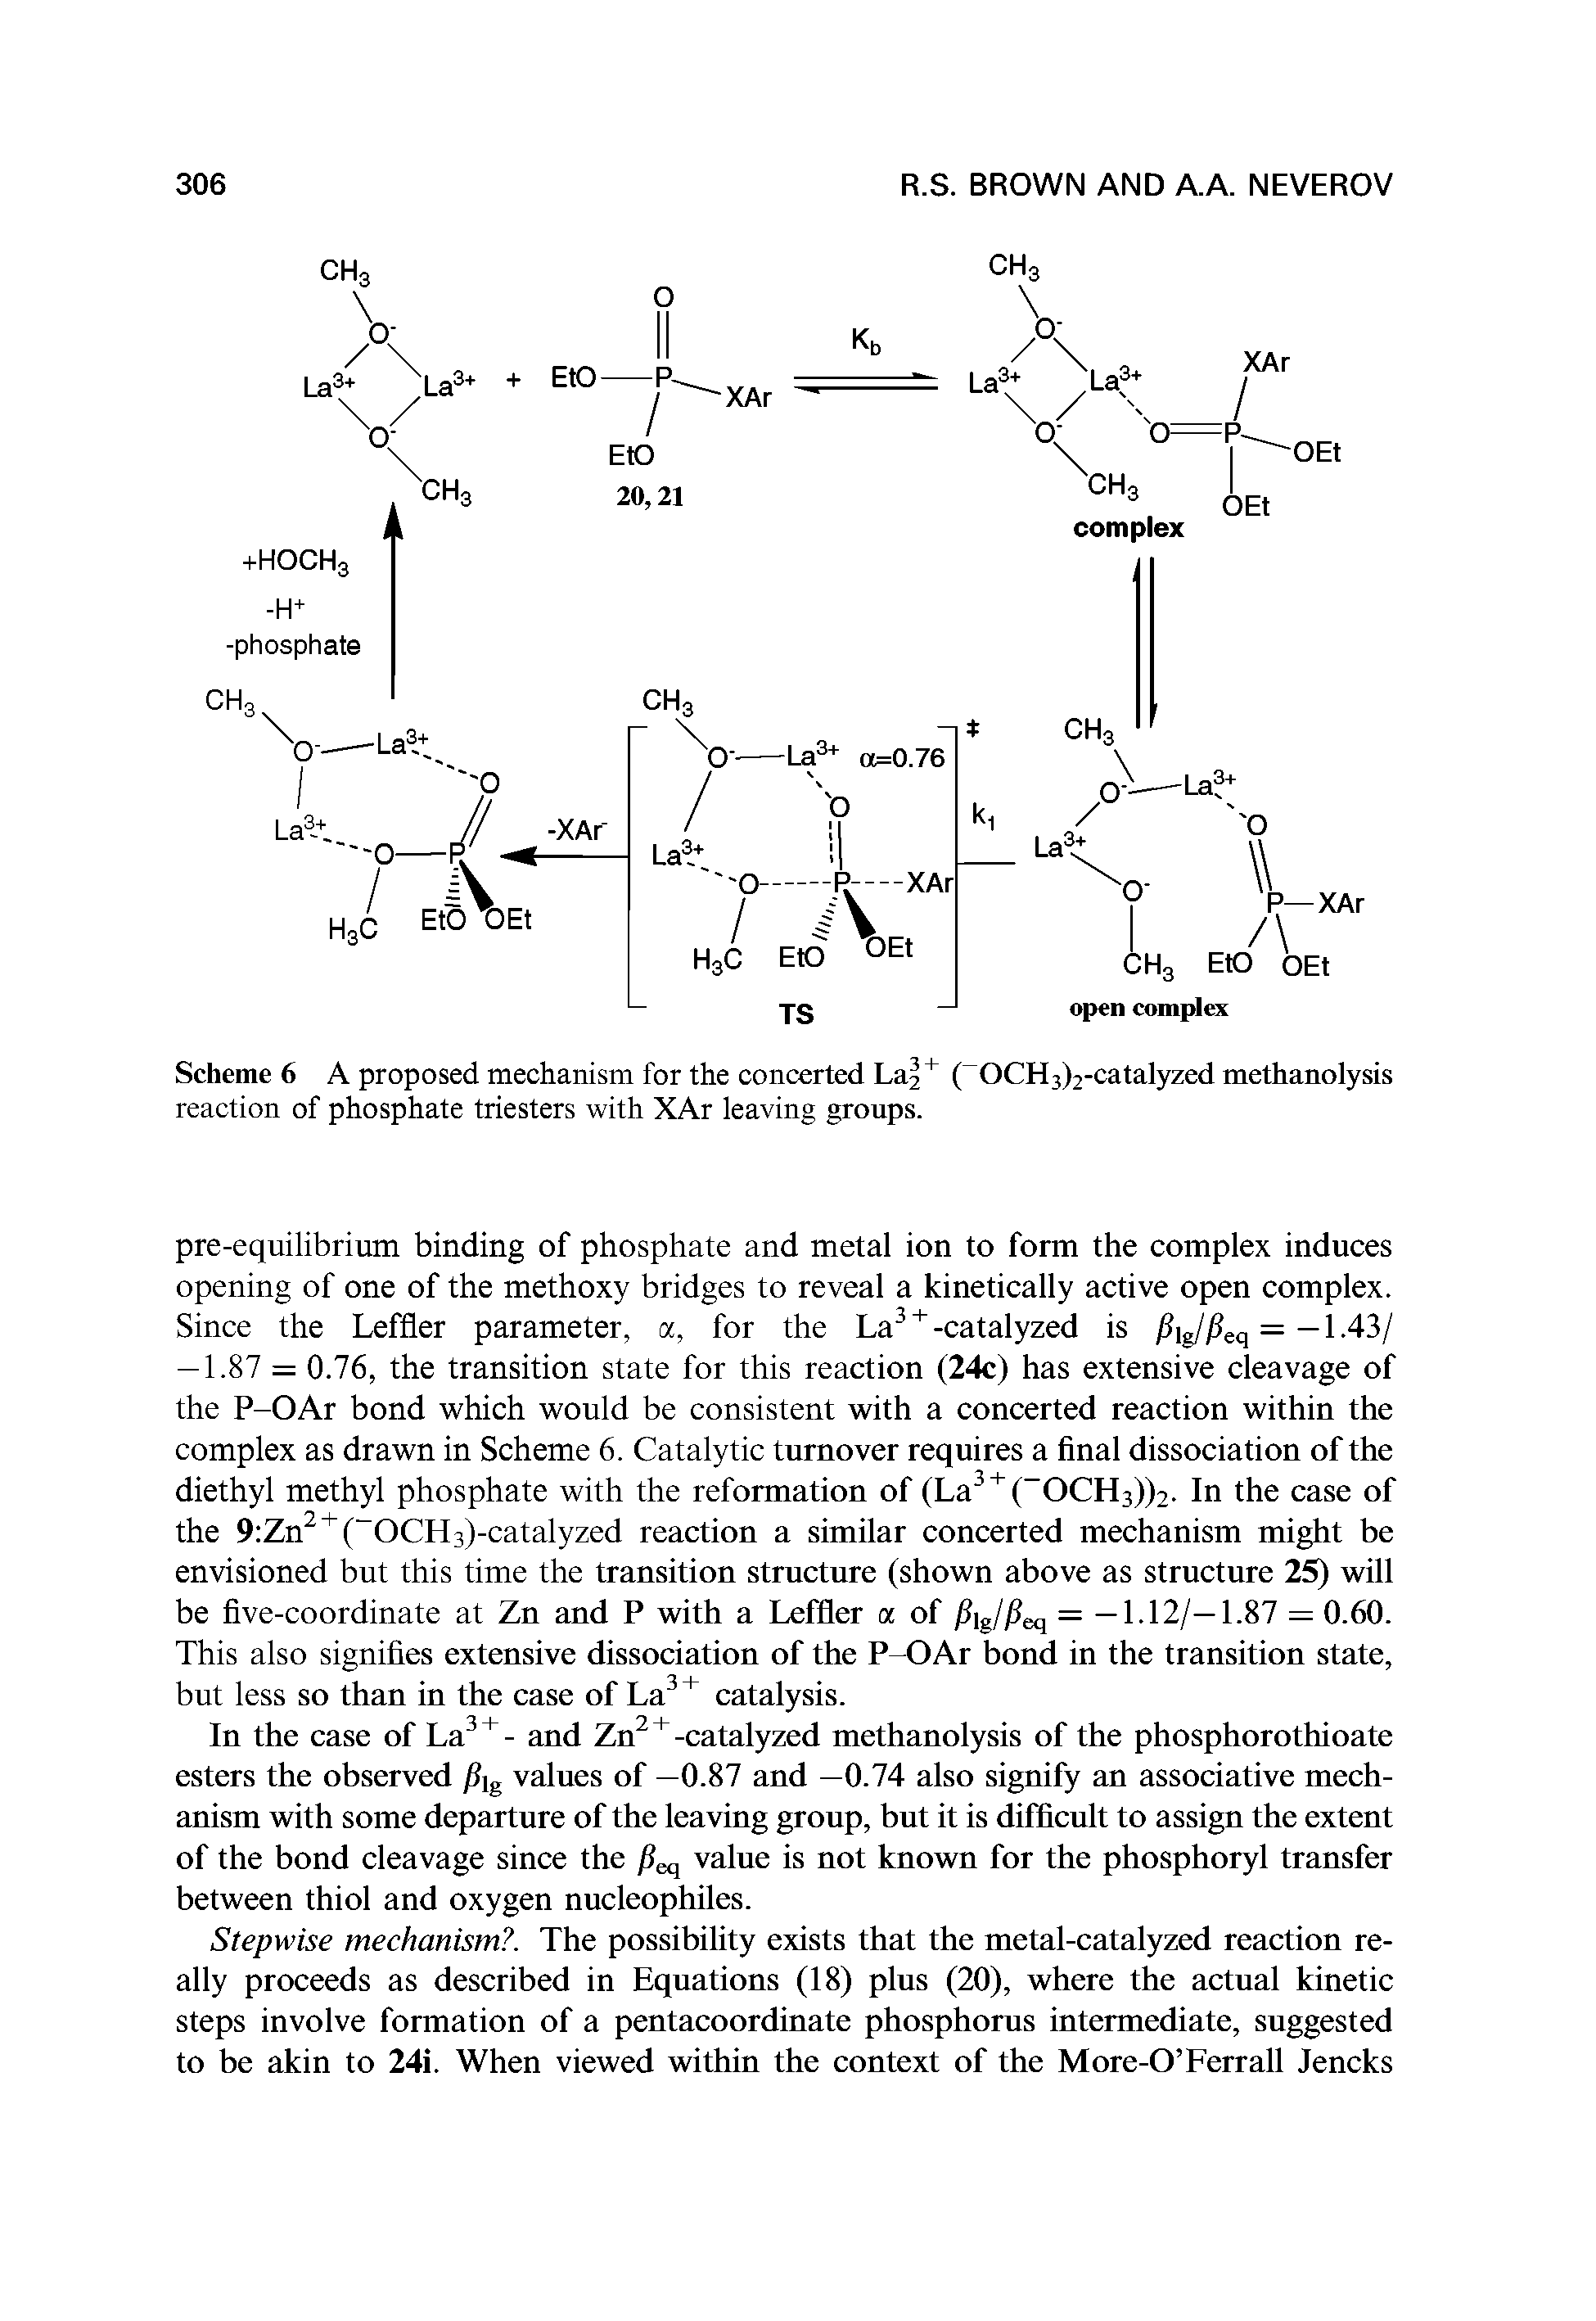 Scheme 6 A proposed mechanism for the concerted La + ( OCH3)2-catalyzed methanolysis reaction of phosphate triesters with XAr leaving groups.